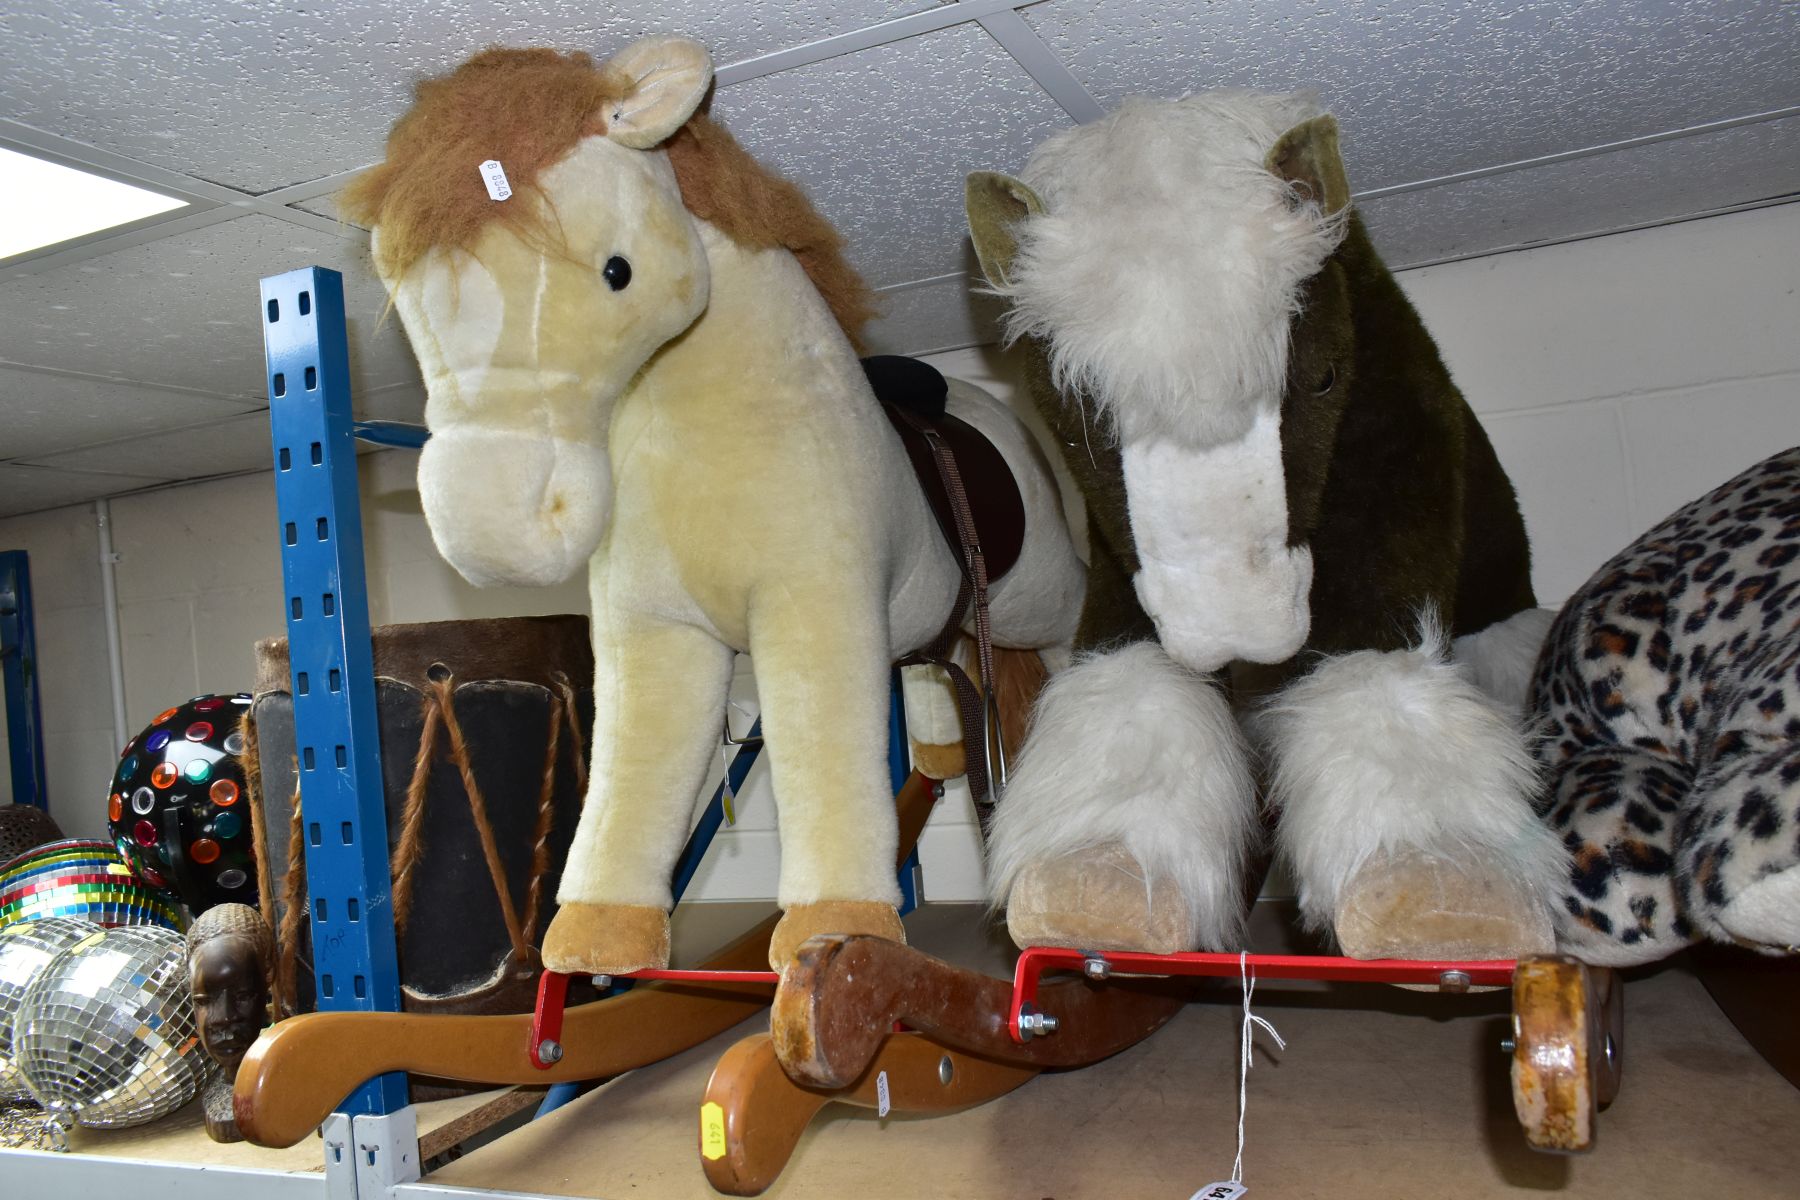 TWO MERRYTHOUGHT ROCKING HORSES, both in playworn condition with marking, wear and minor damage, one